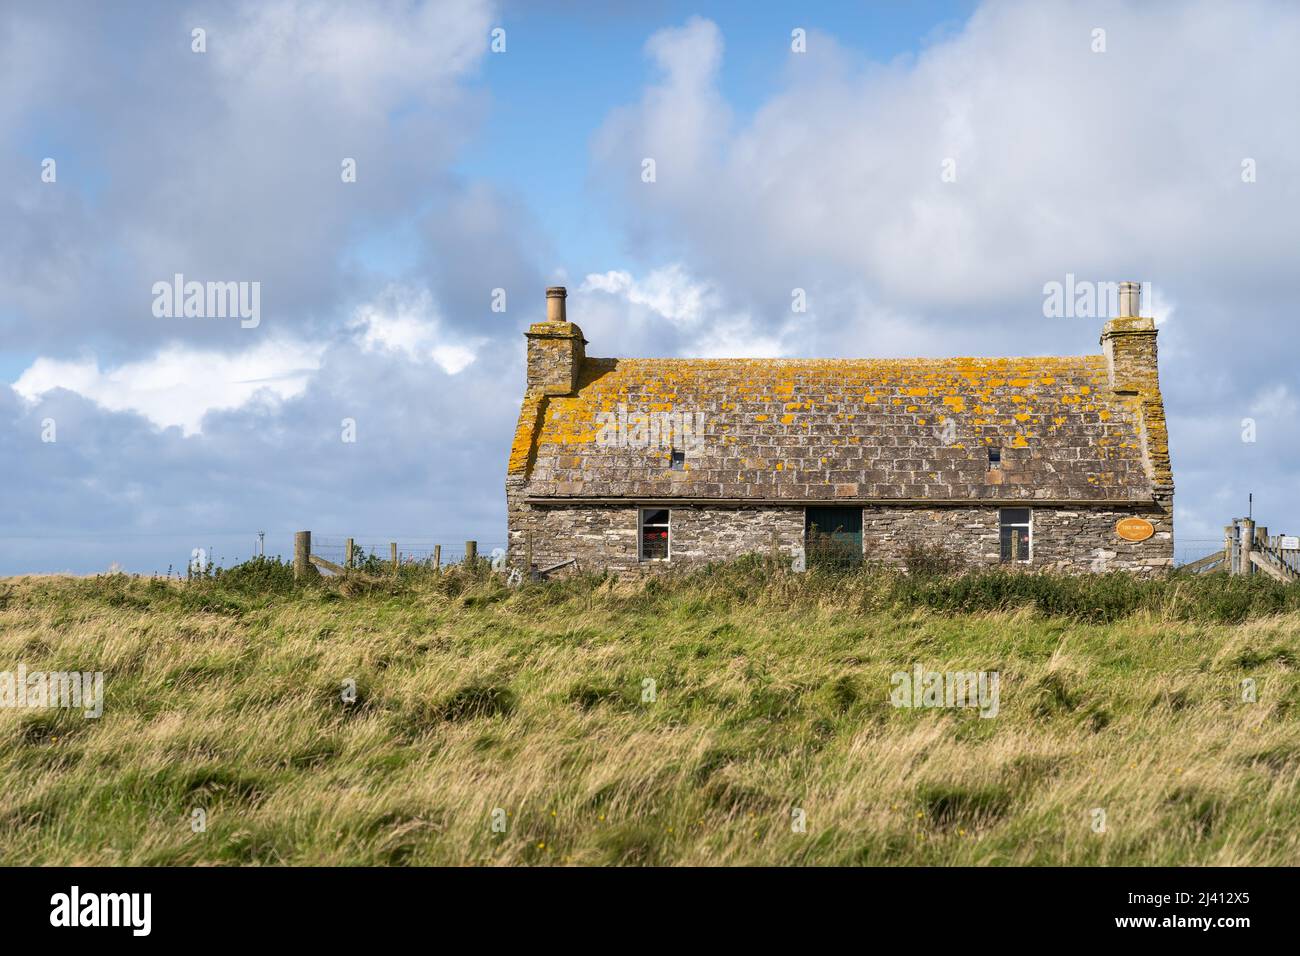 An old stone croft house with a lichen covered roof on the island of Sanday, part of the Orkney Isles in Scotland. Stock Photo